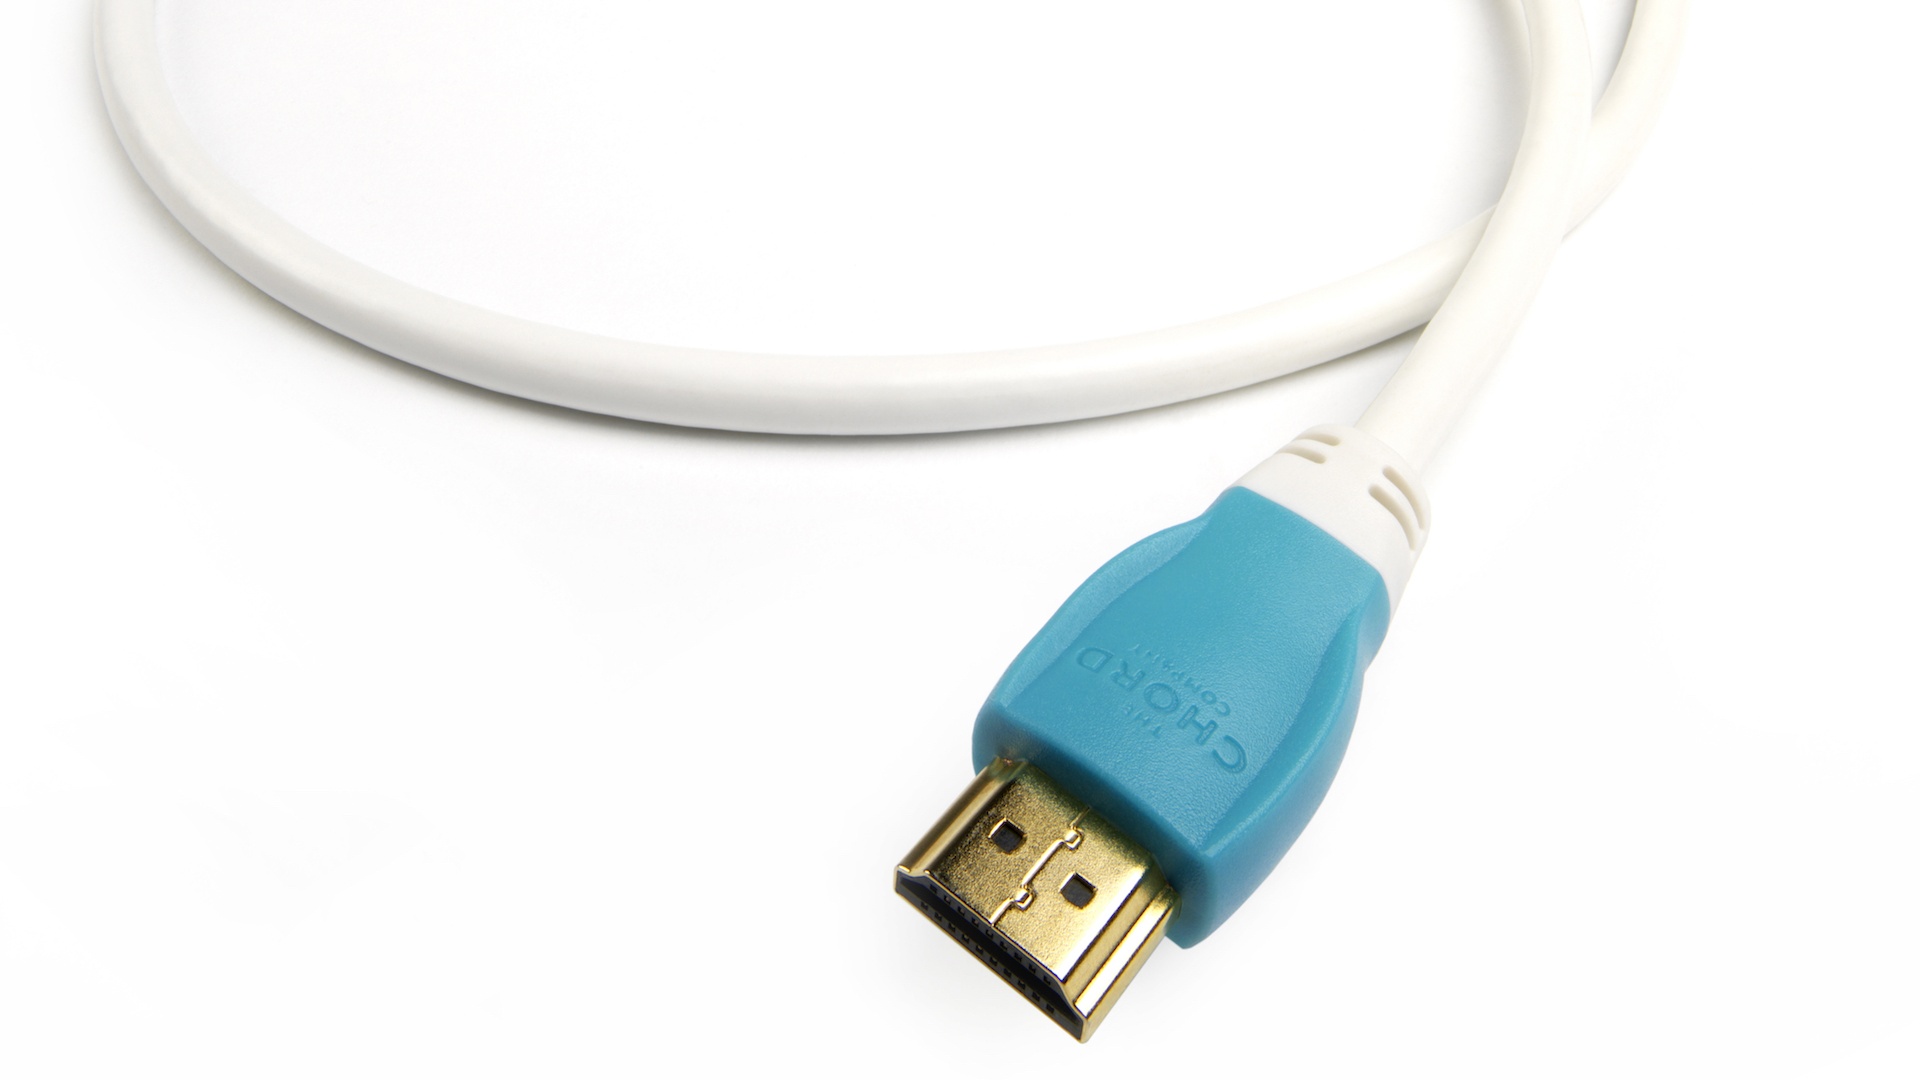 Understand HDMI 2.1 and HDMI 2.0 and relationship of bandwidth and